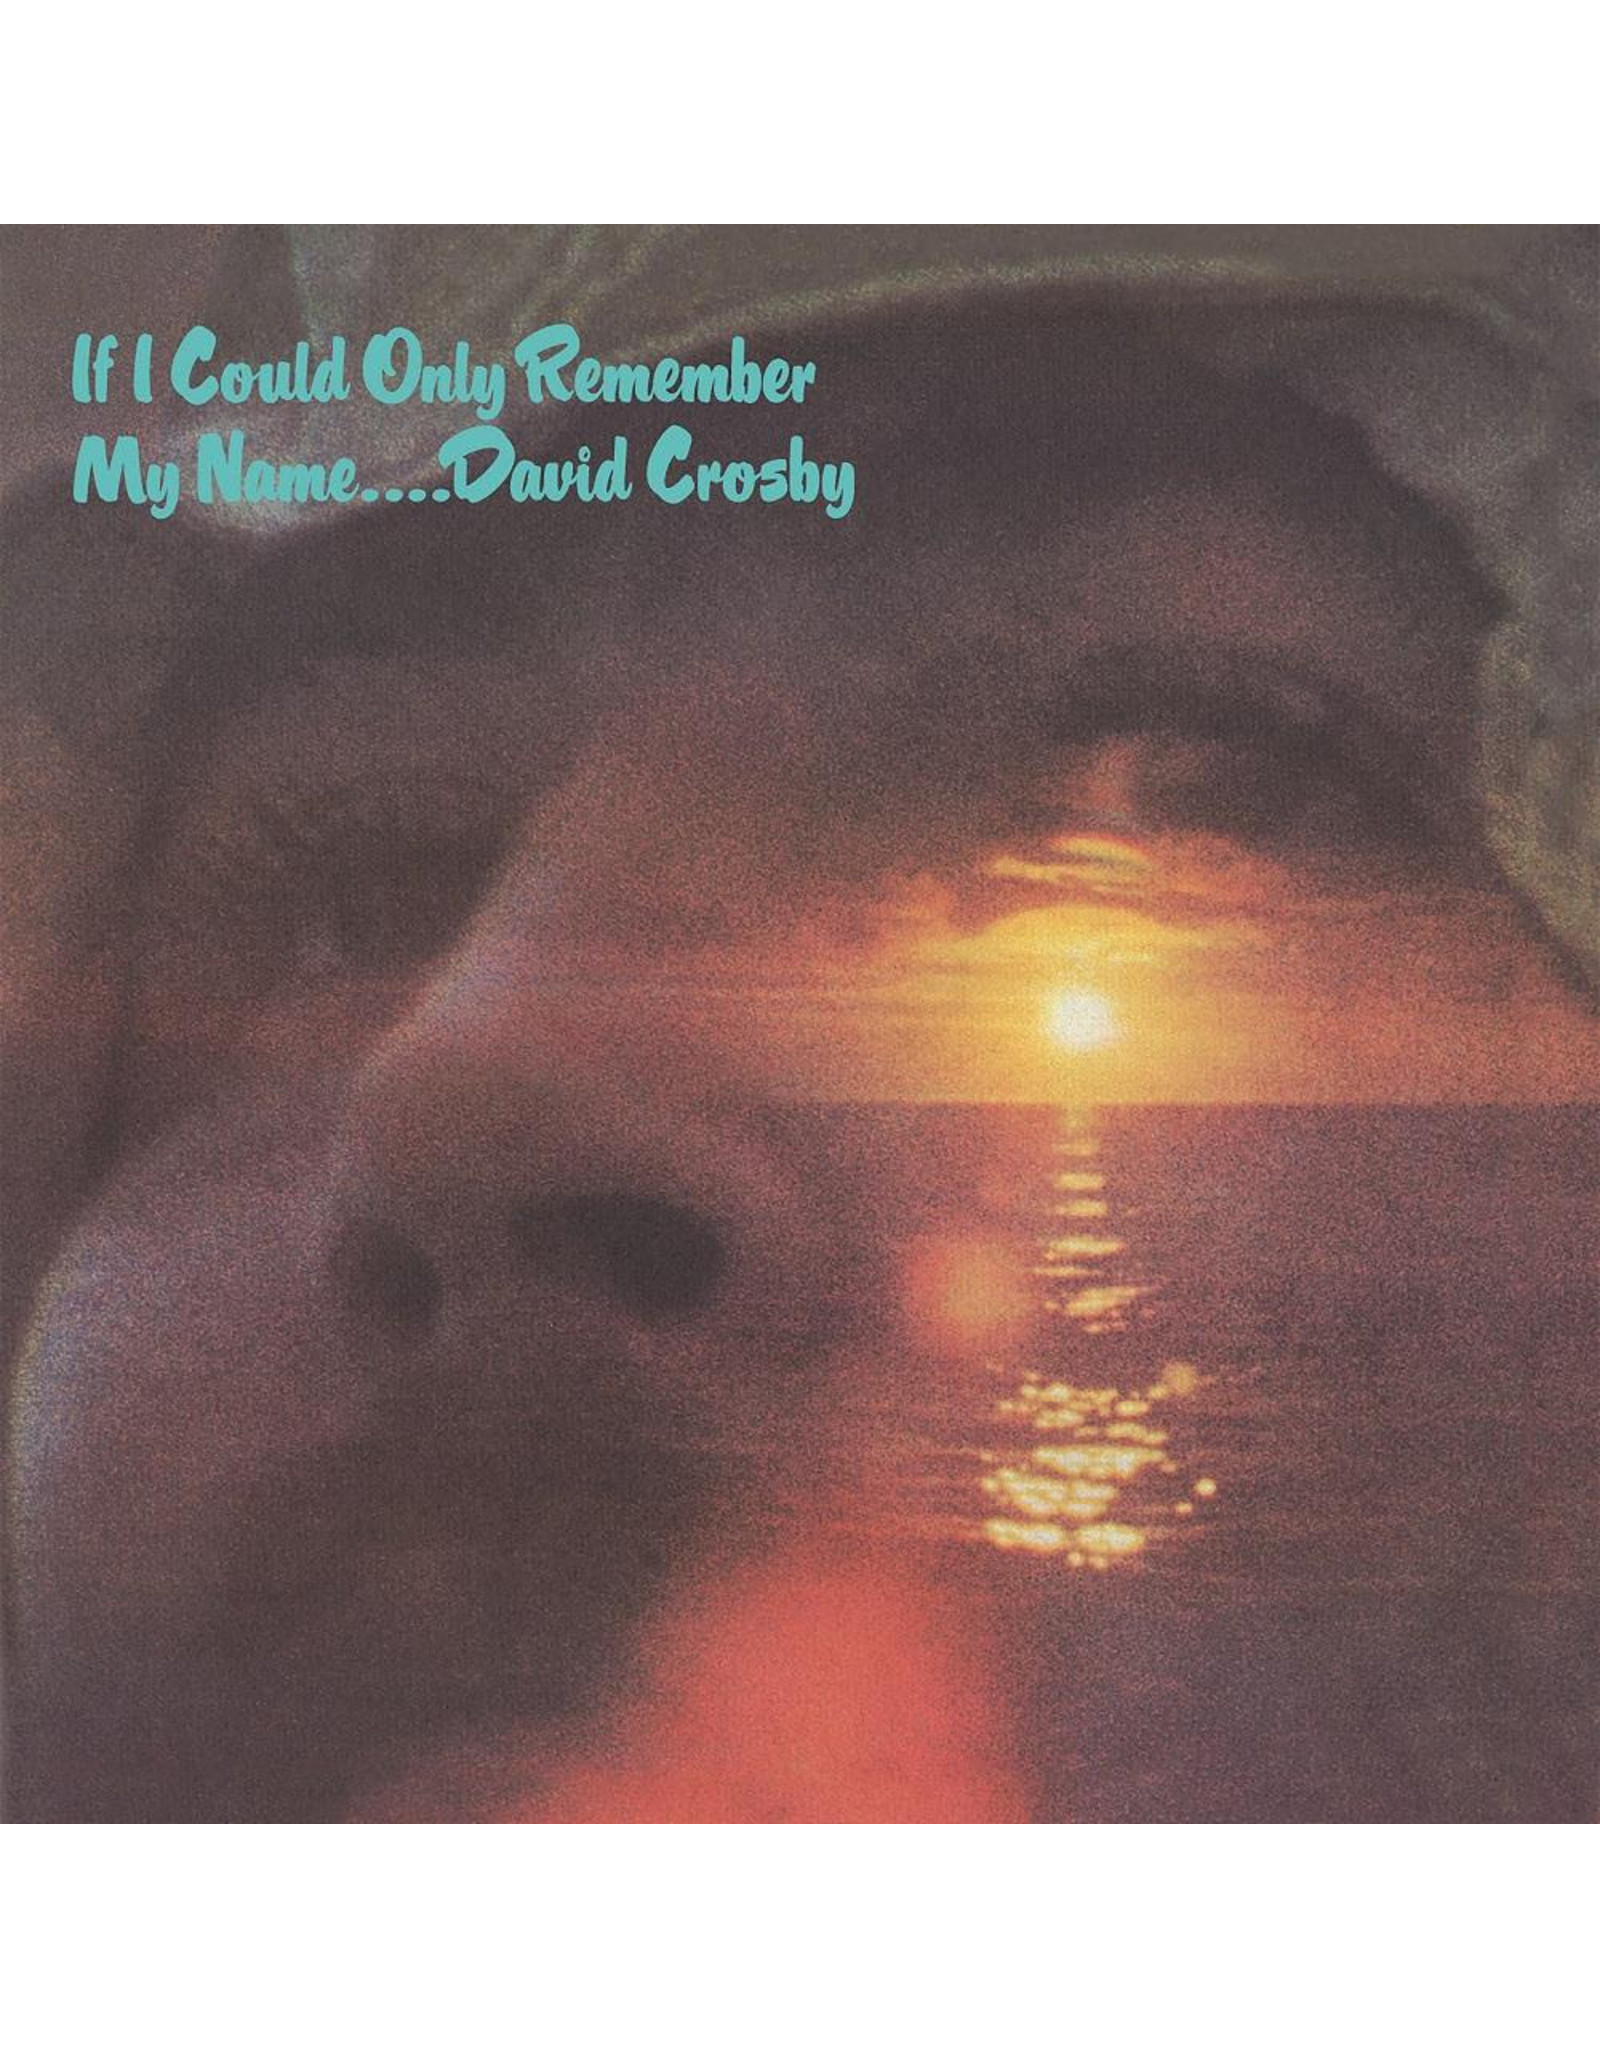 Crosby, David - If I Could Only Remember My Name CD (50th Anniversary Expanded Edition)